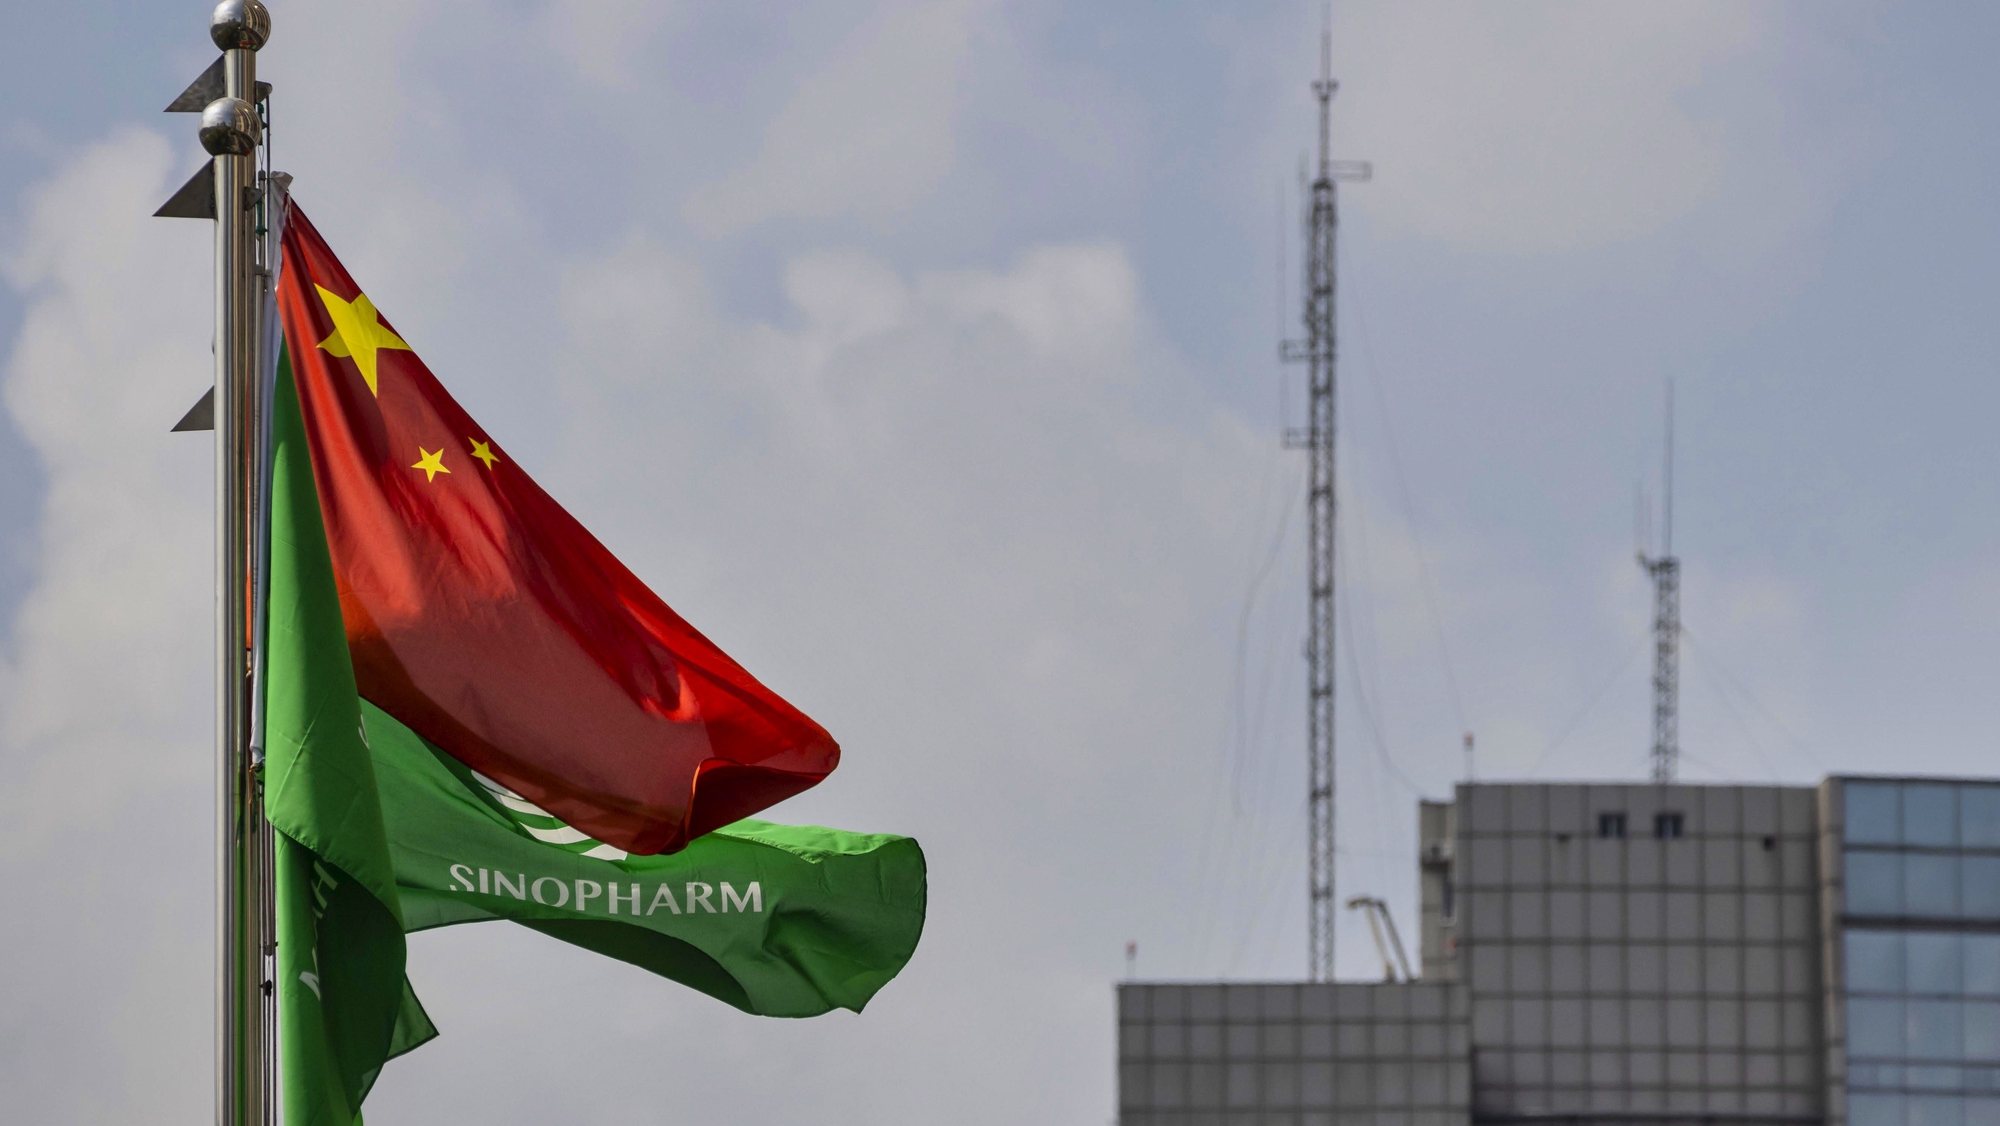 epa08628134 A flag with the Sinopharm company logo flies at the company&#039;s headquarters in Shanghai, China, 25 August 2020 (issued 27 August 2020). According to media reports, Sinopharm, major state-owned Chinese pharmaceutical company, plans to have a COVID-19 vaccine on the market by the end of 2020.  EPA/ALEX PLAVEVSKI